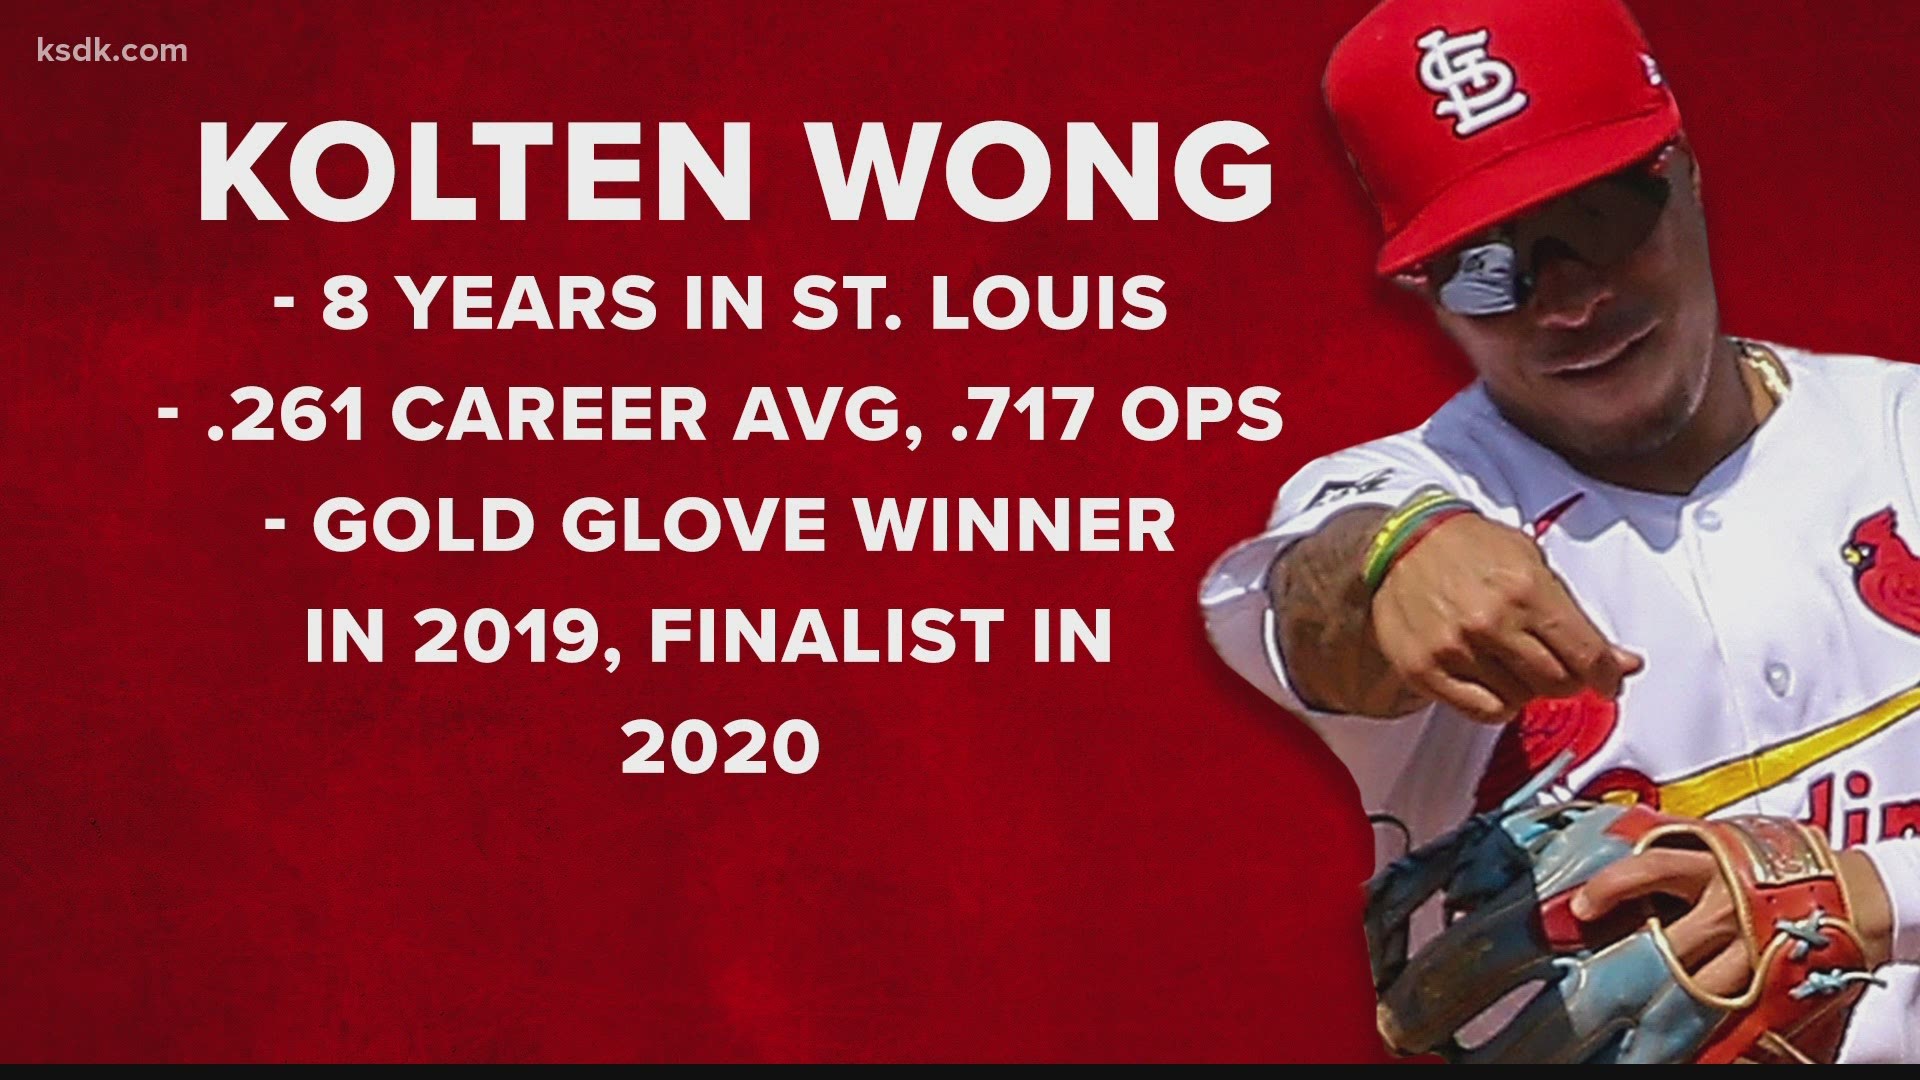 Wong has spent his entire Major League career in St. Louis